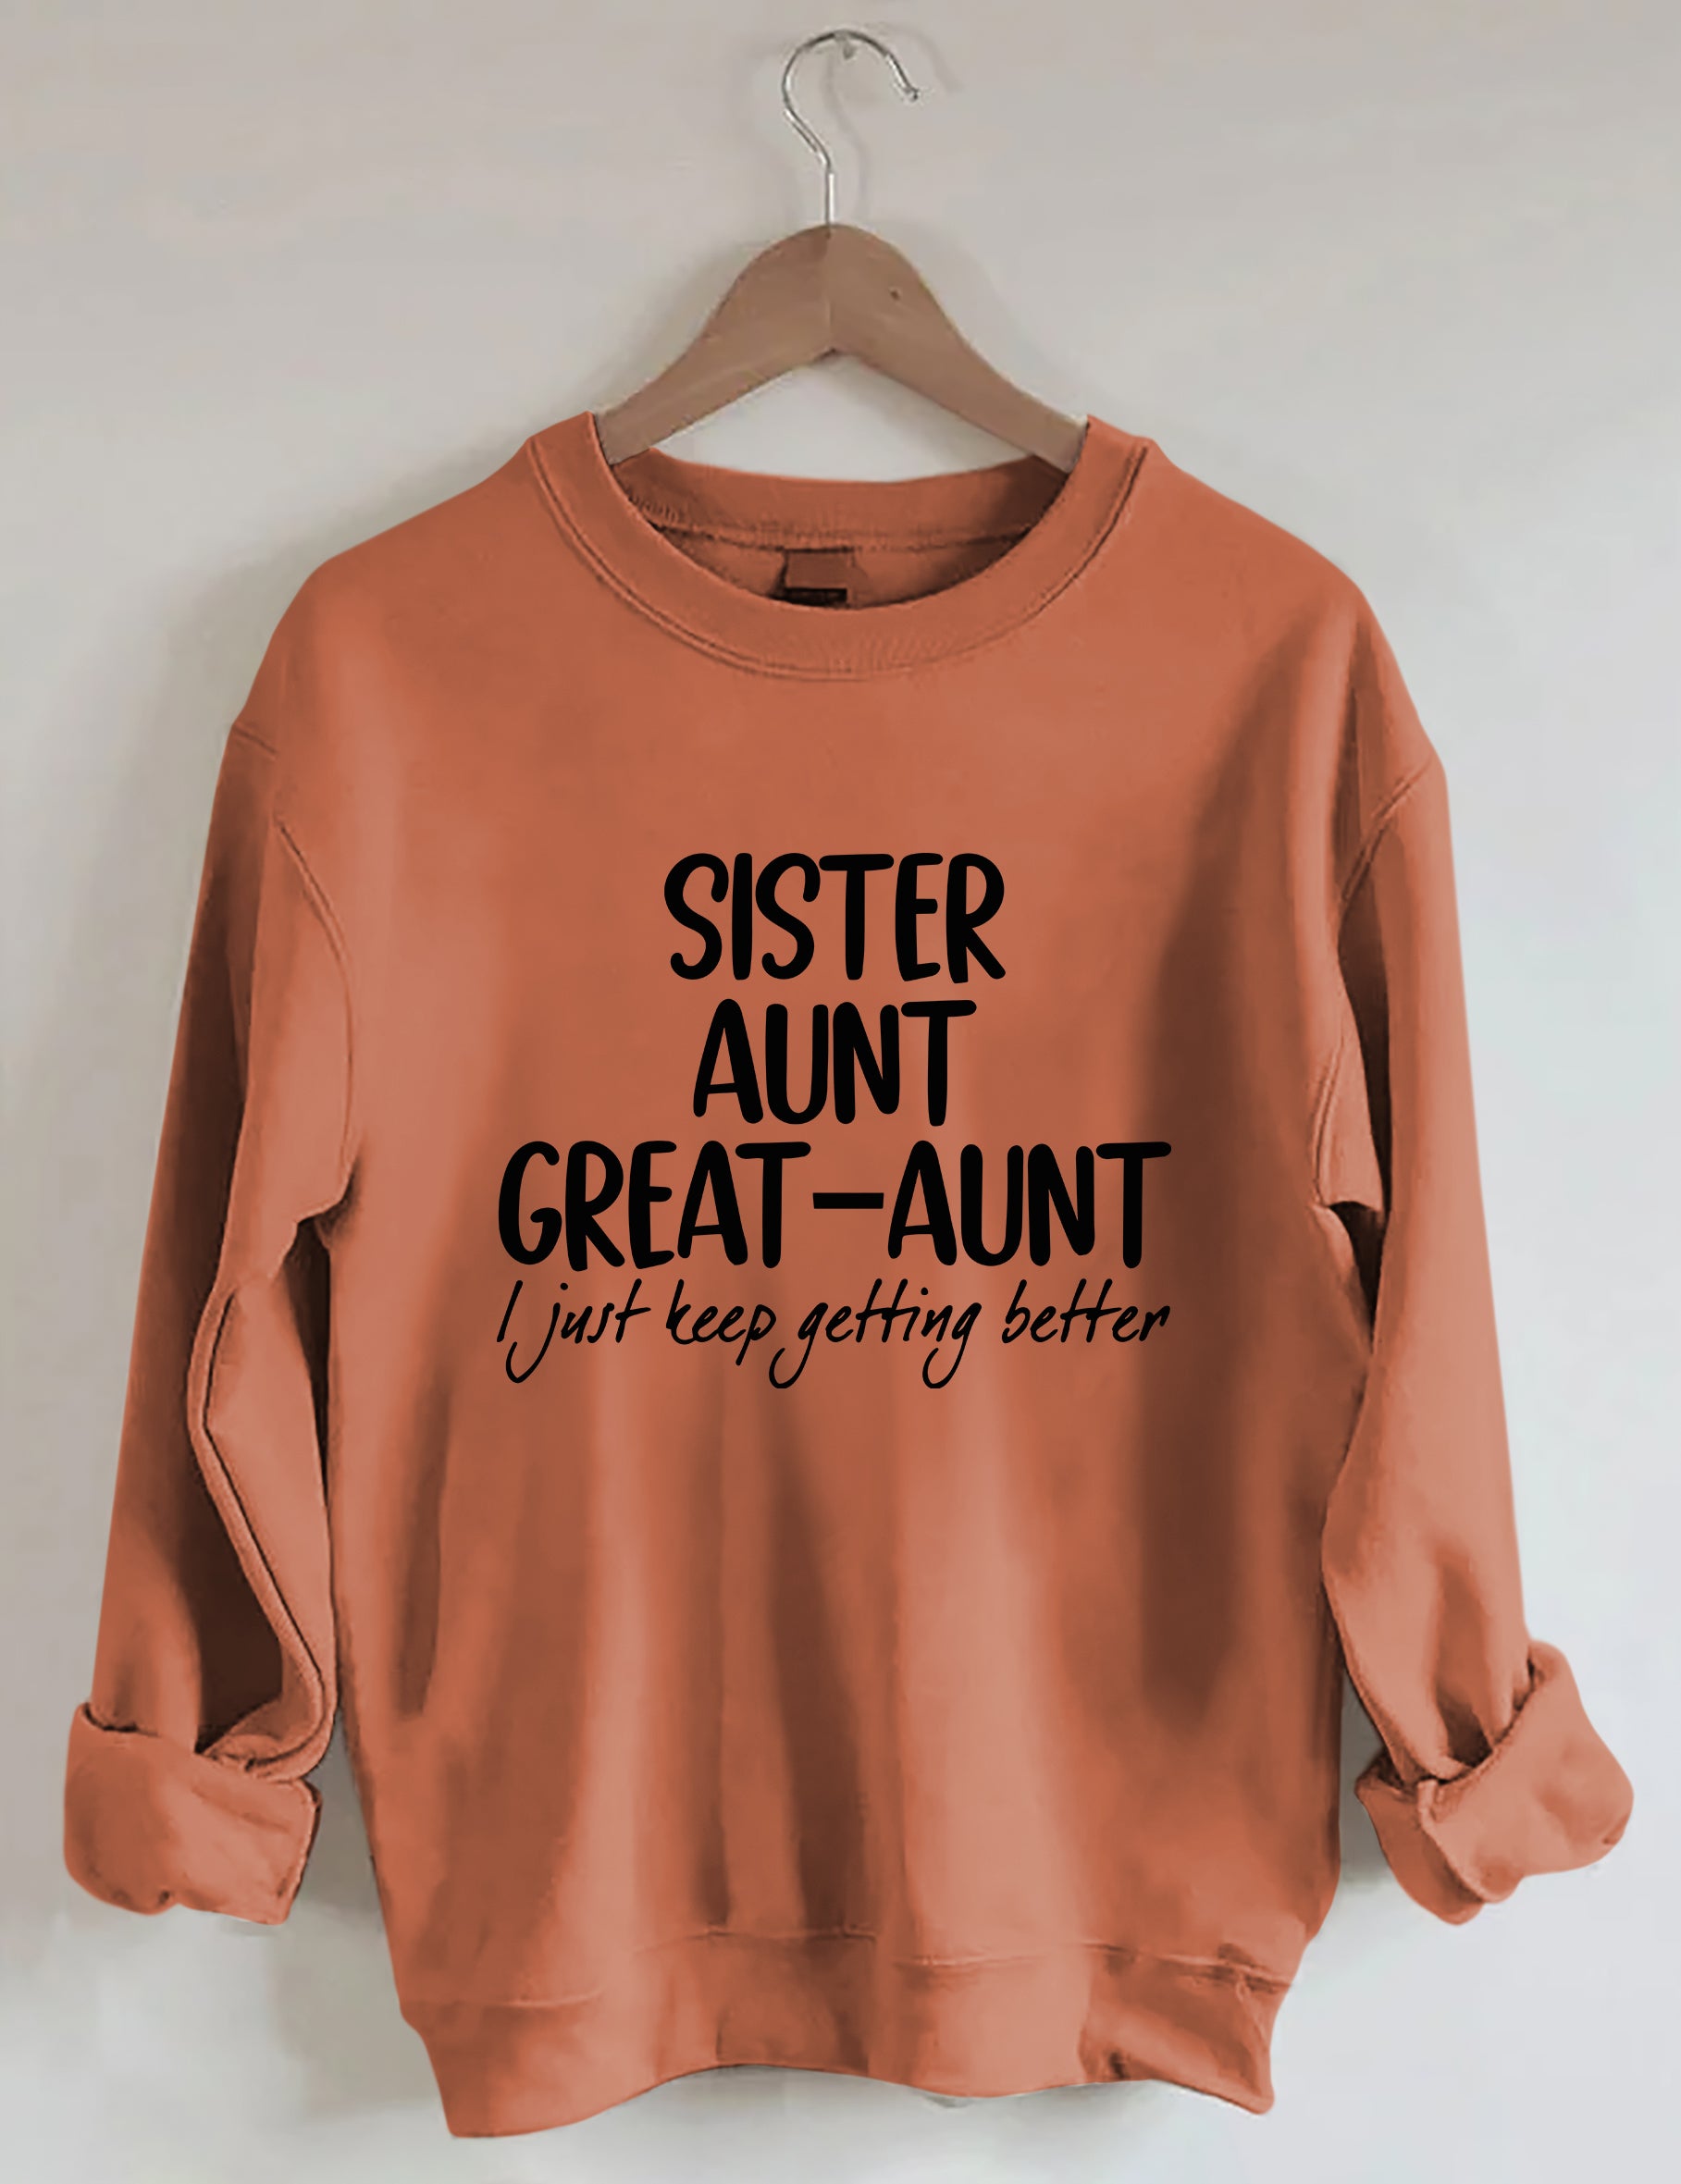 Sister Aunt Great-Aunt I Just Keep Getting Better Sweatshirt